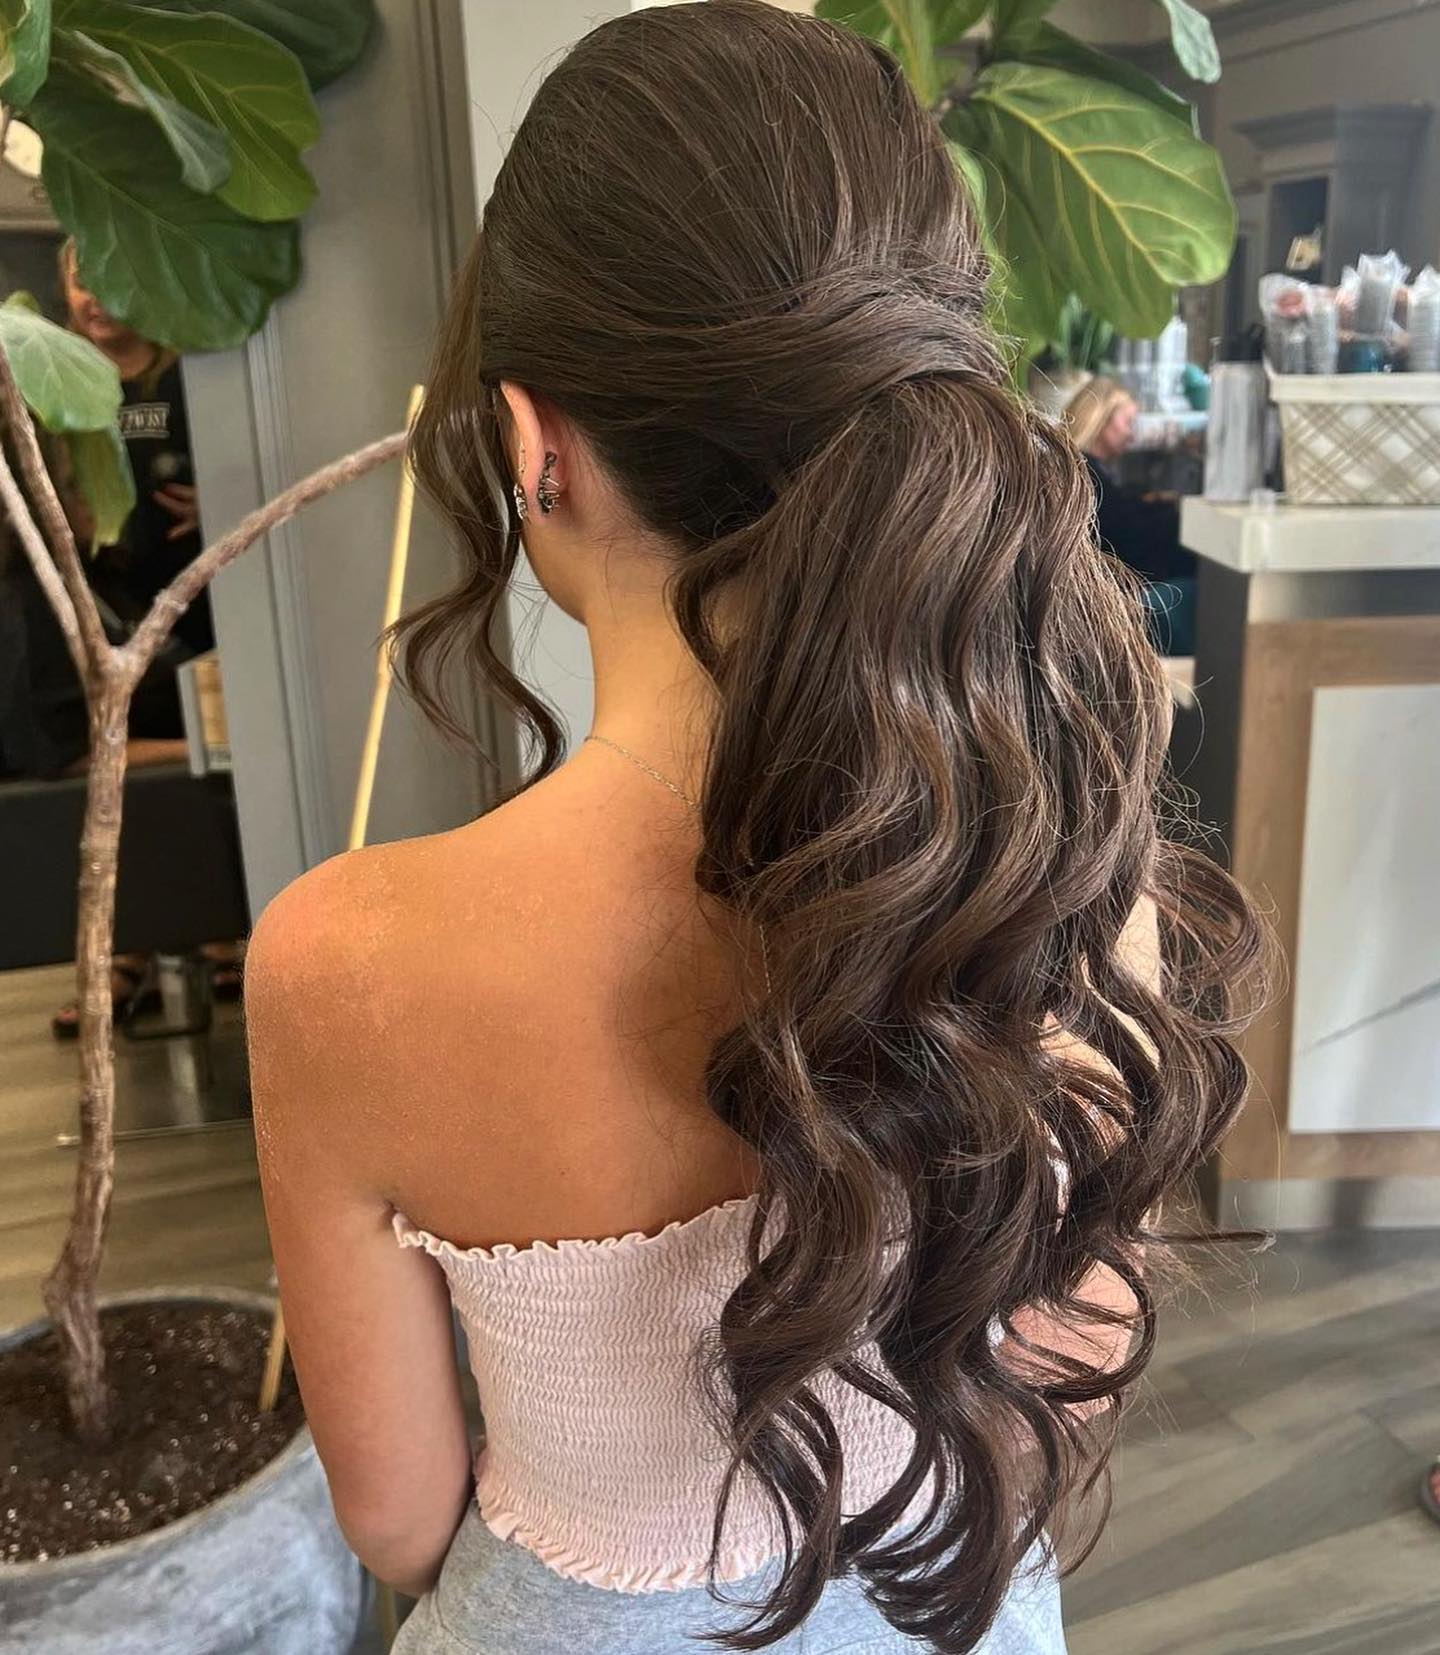 mid-height prom ponytail hairstyle